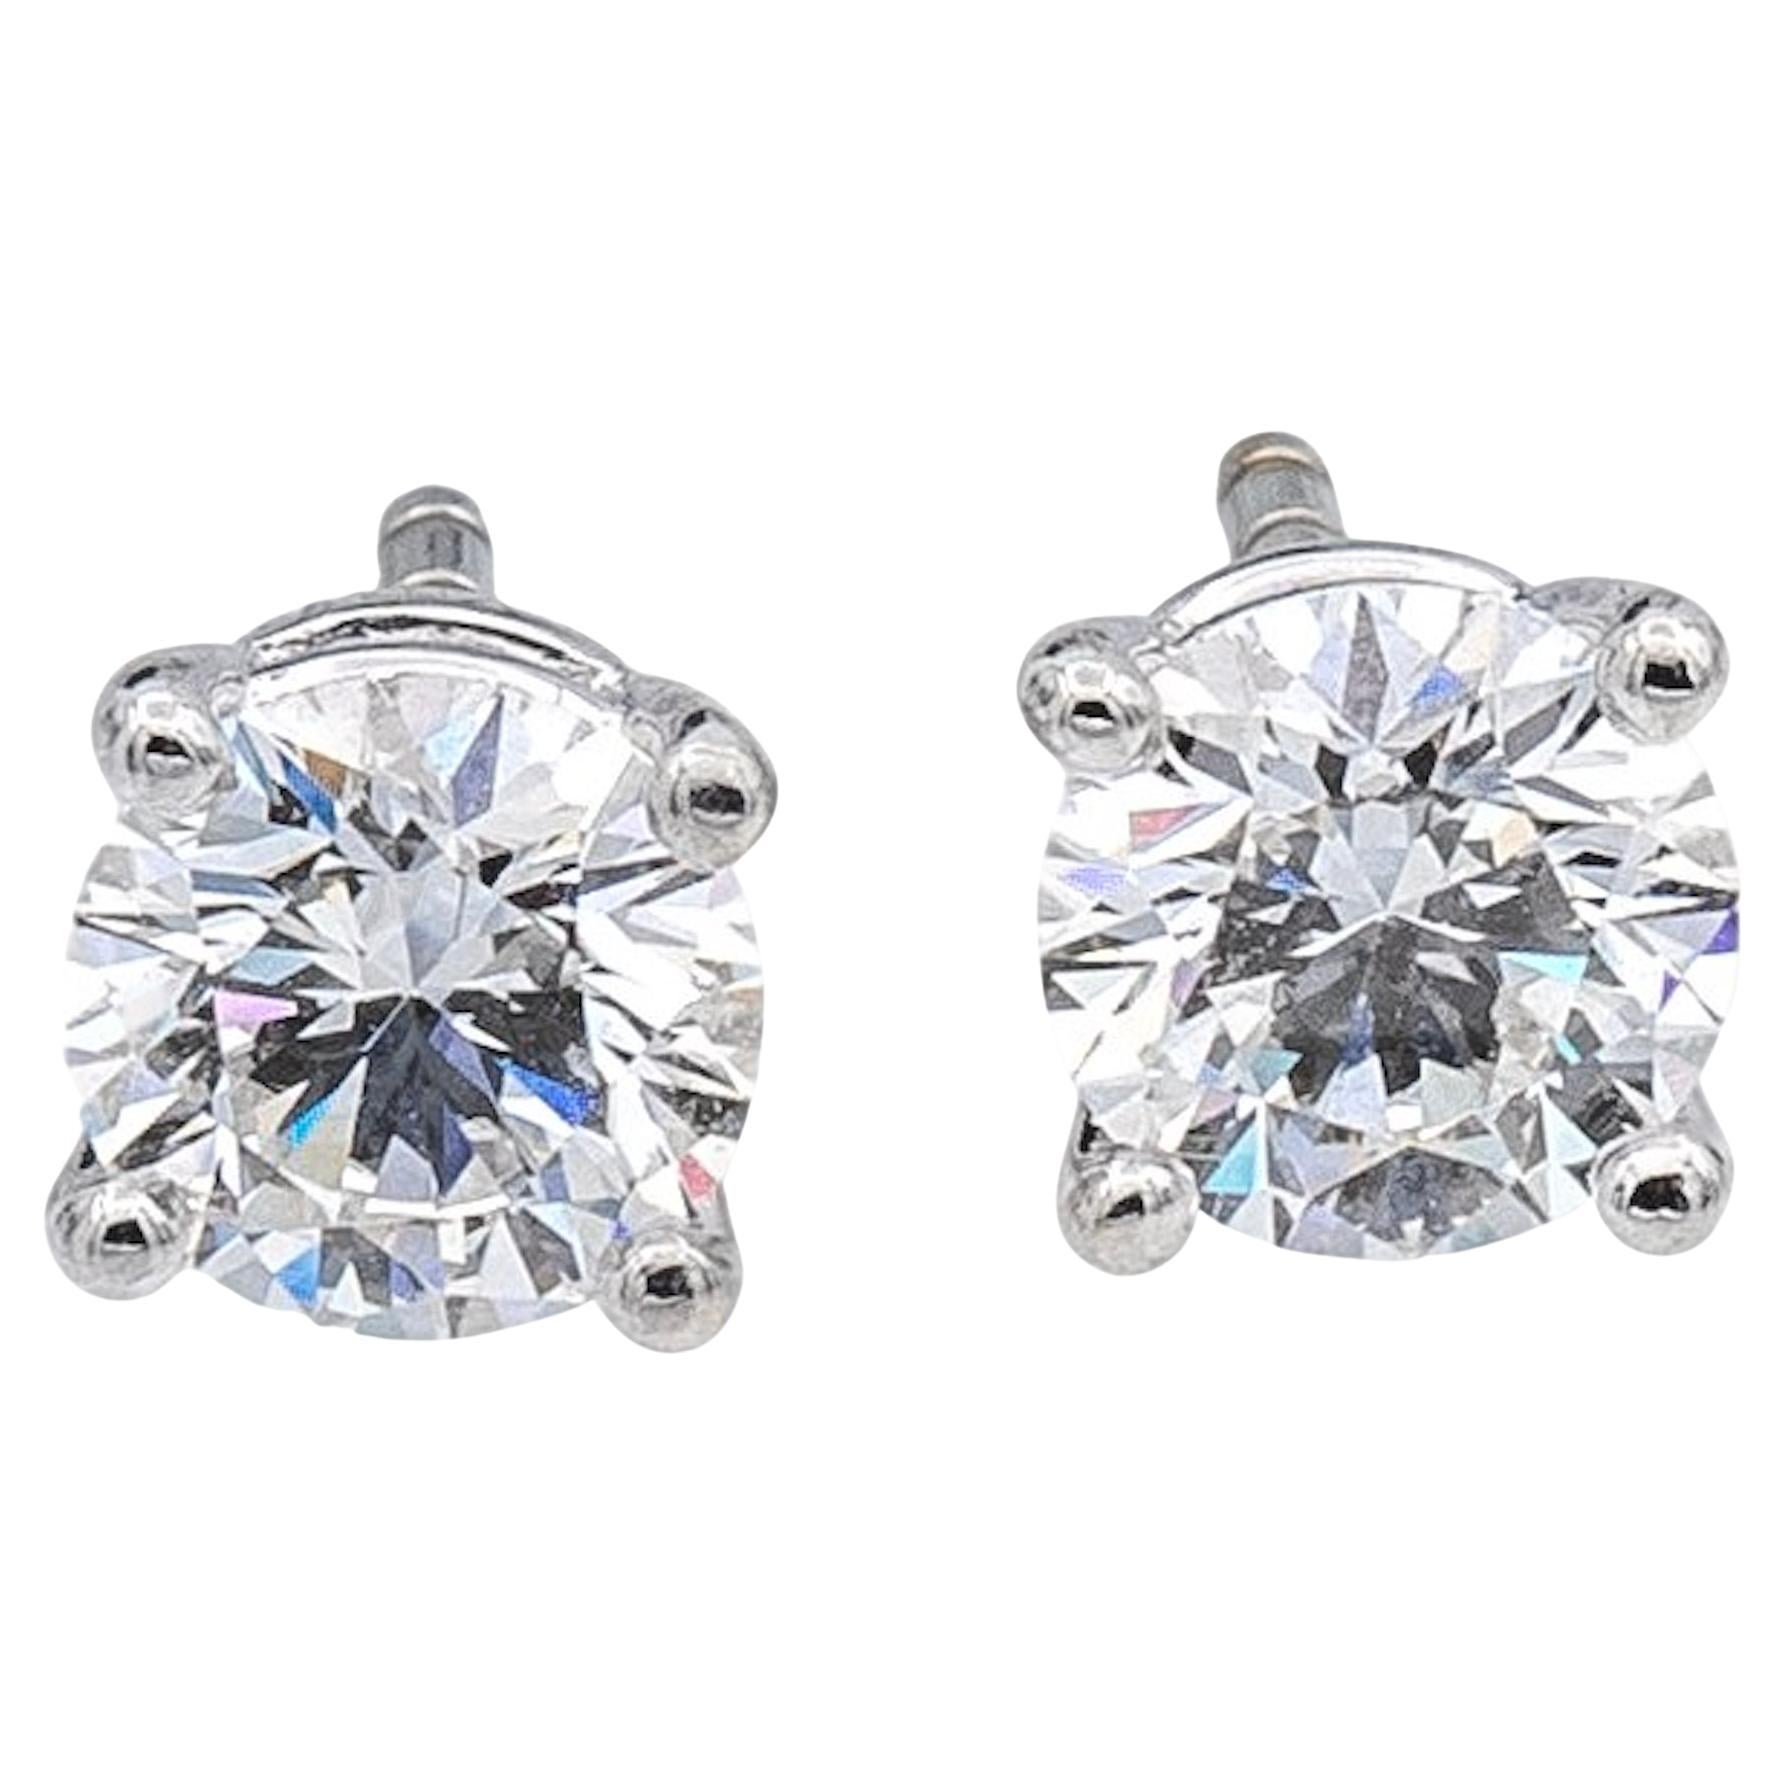 Tiffany & Co. Platinum Classic Round Diamond Stud Earrings 1.42cts Total FVS GIA